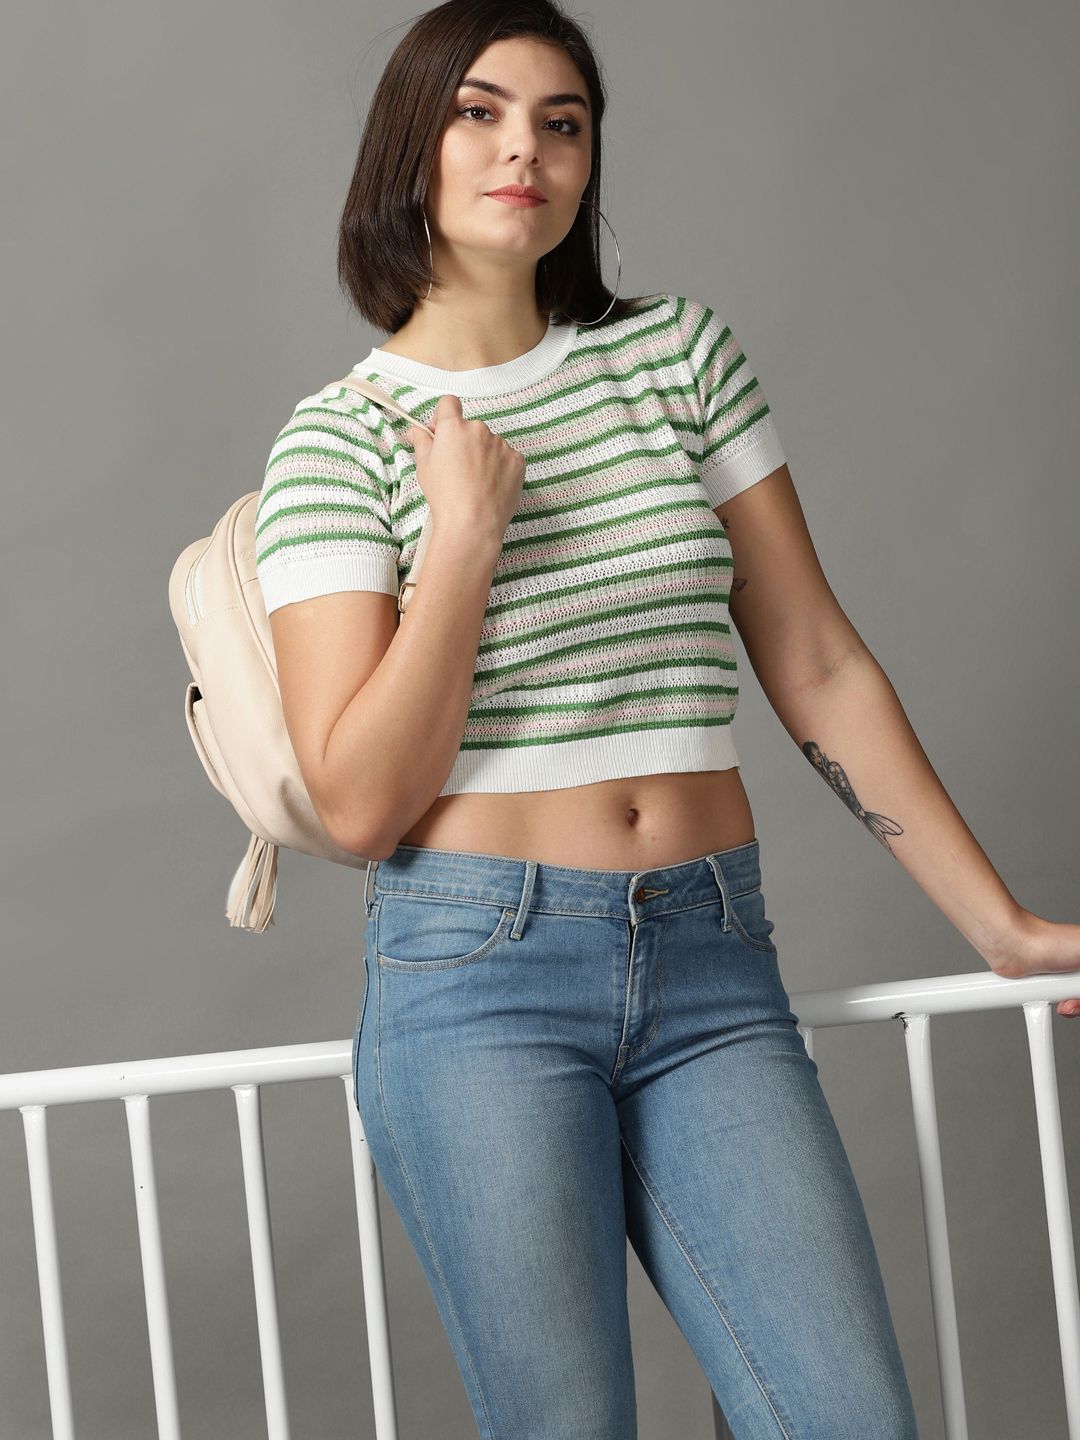 SHOWOFF Green & White Striped Lace Crop Top Price in India